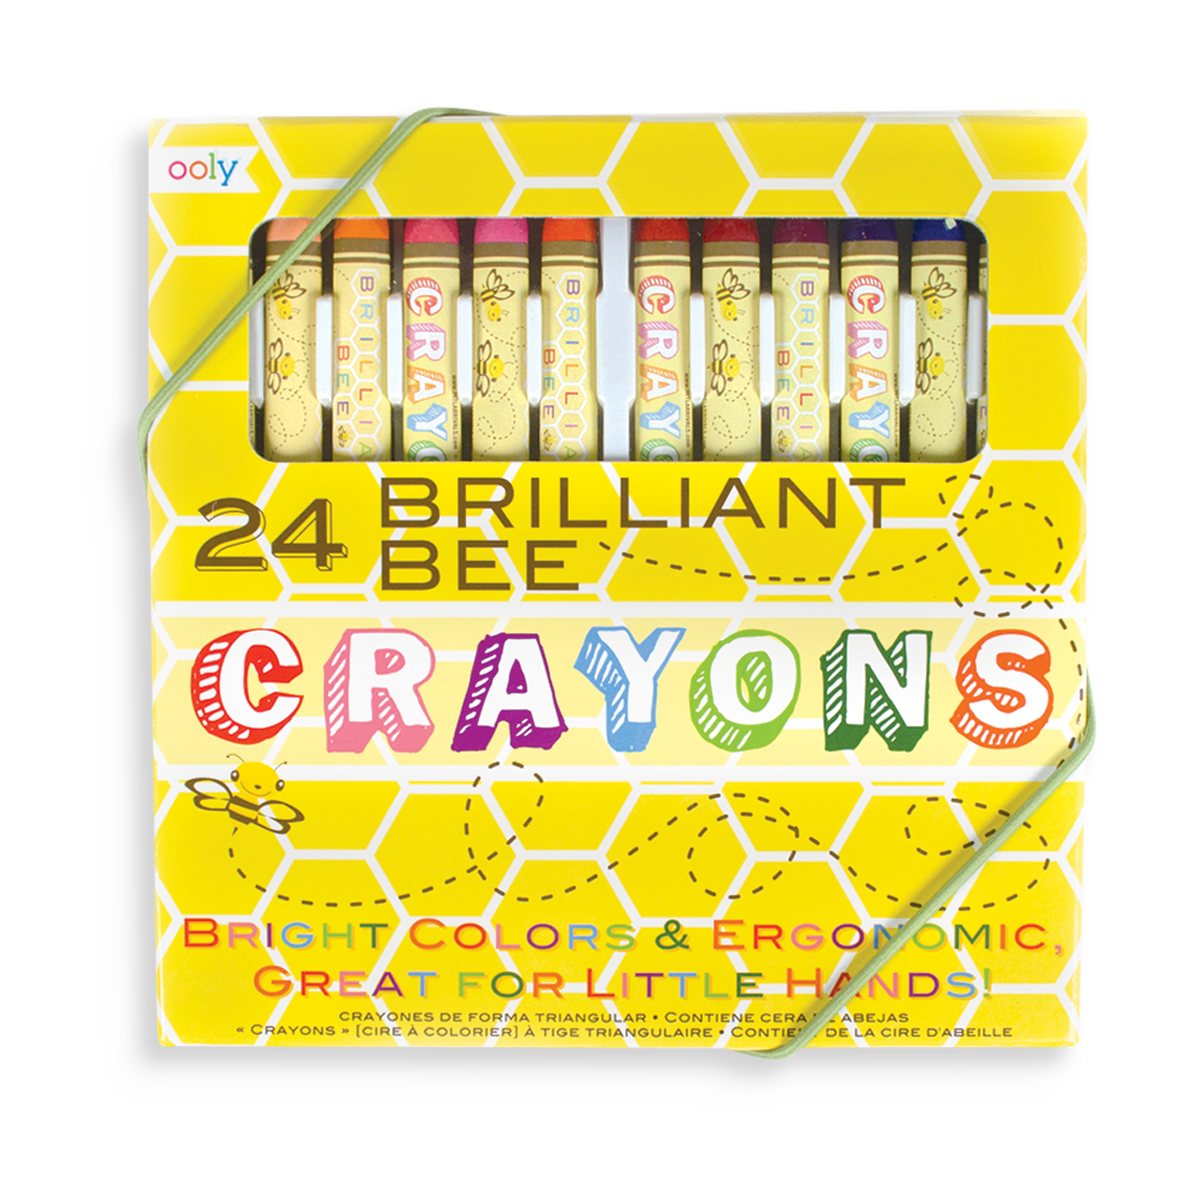 Brilliant Bee Crayons set of 24 bright colored crayons